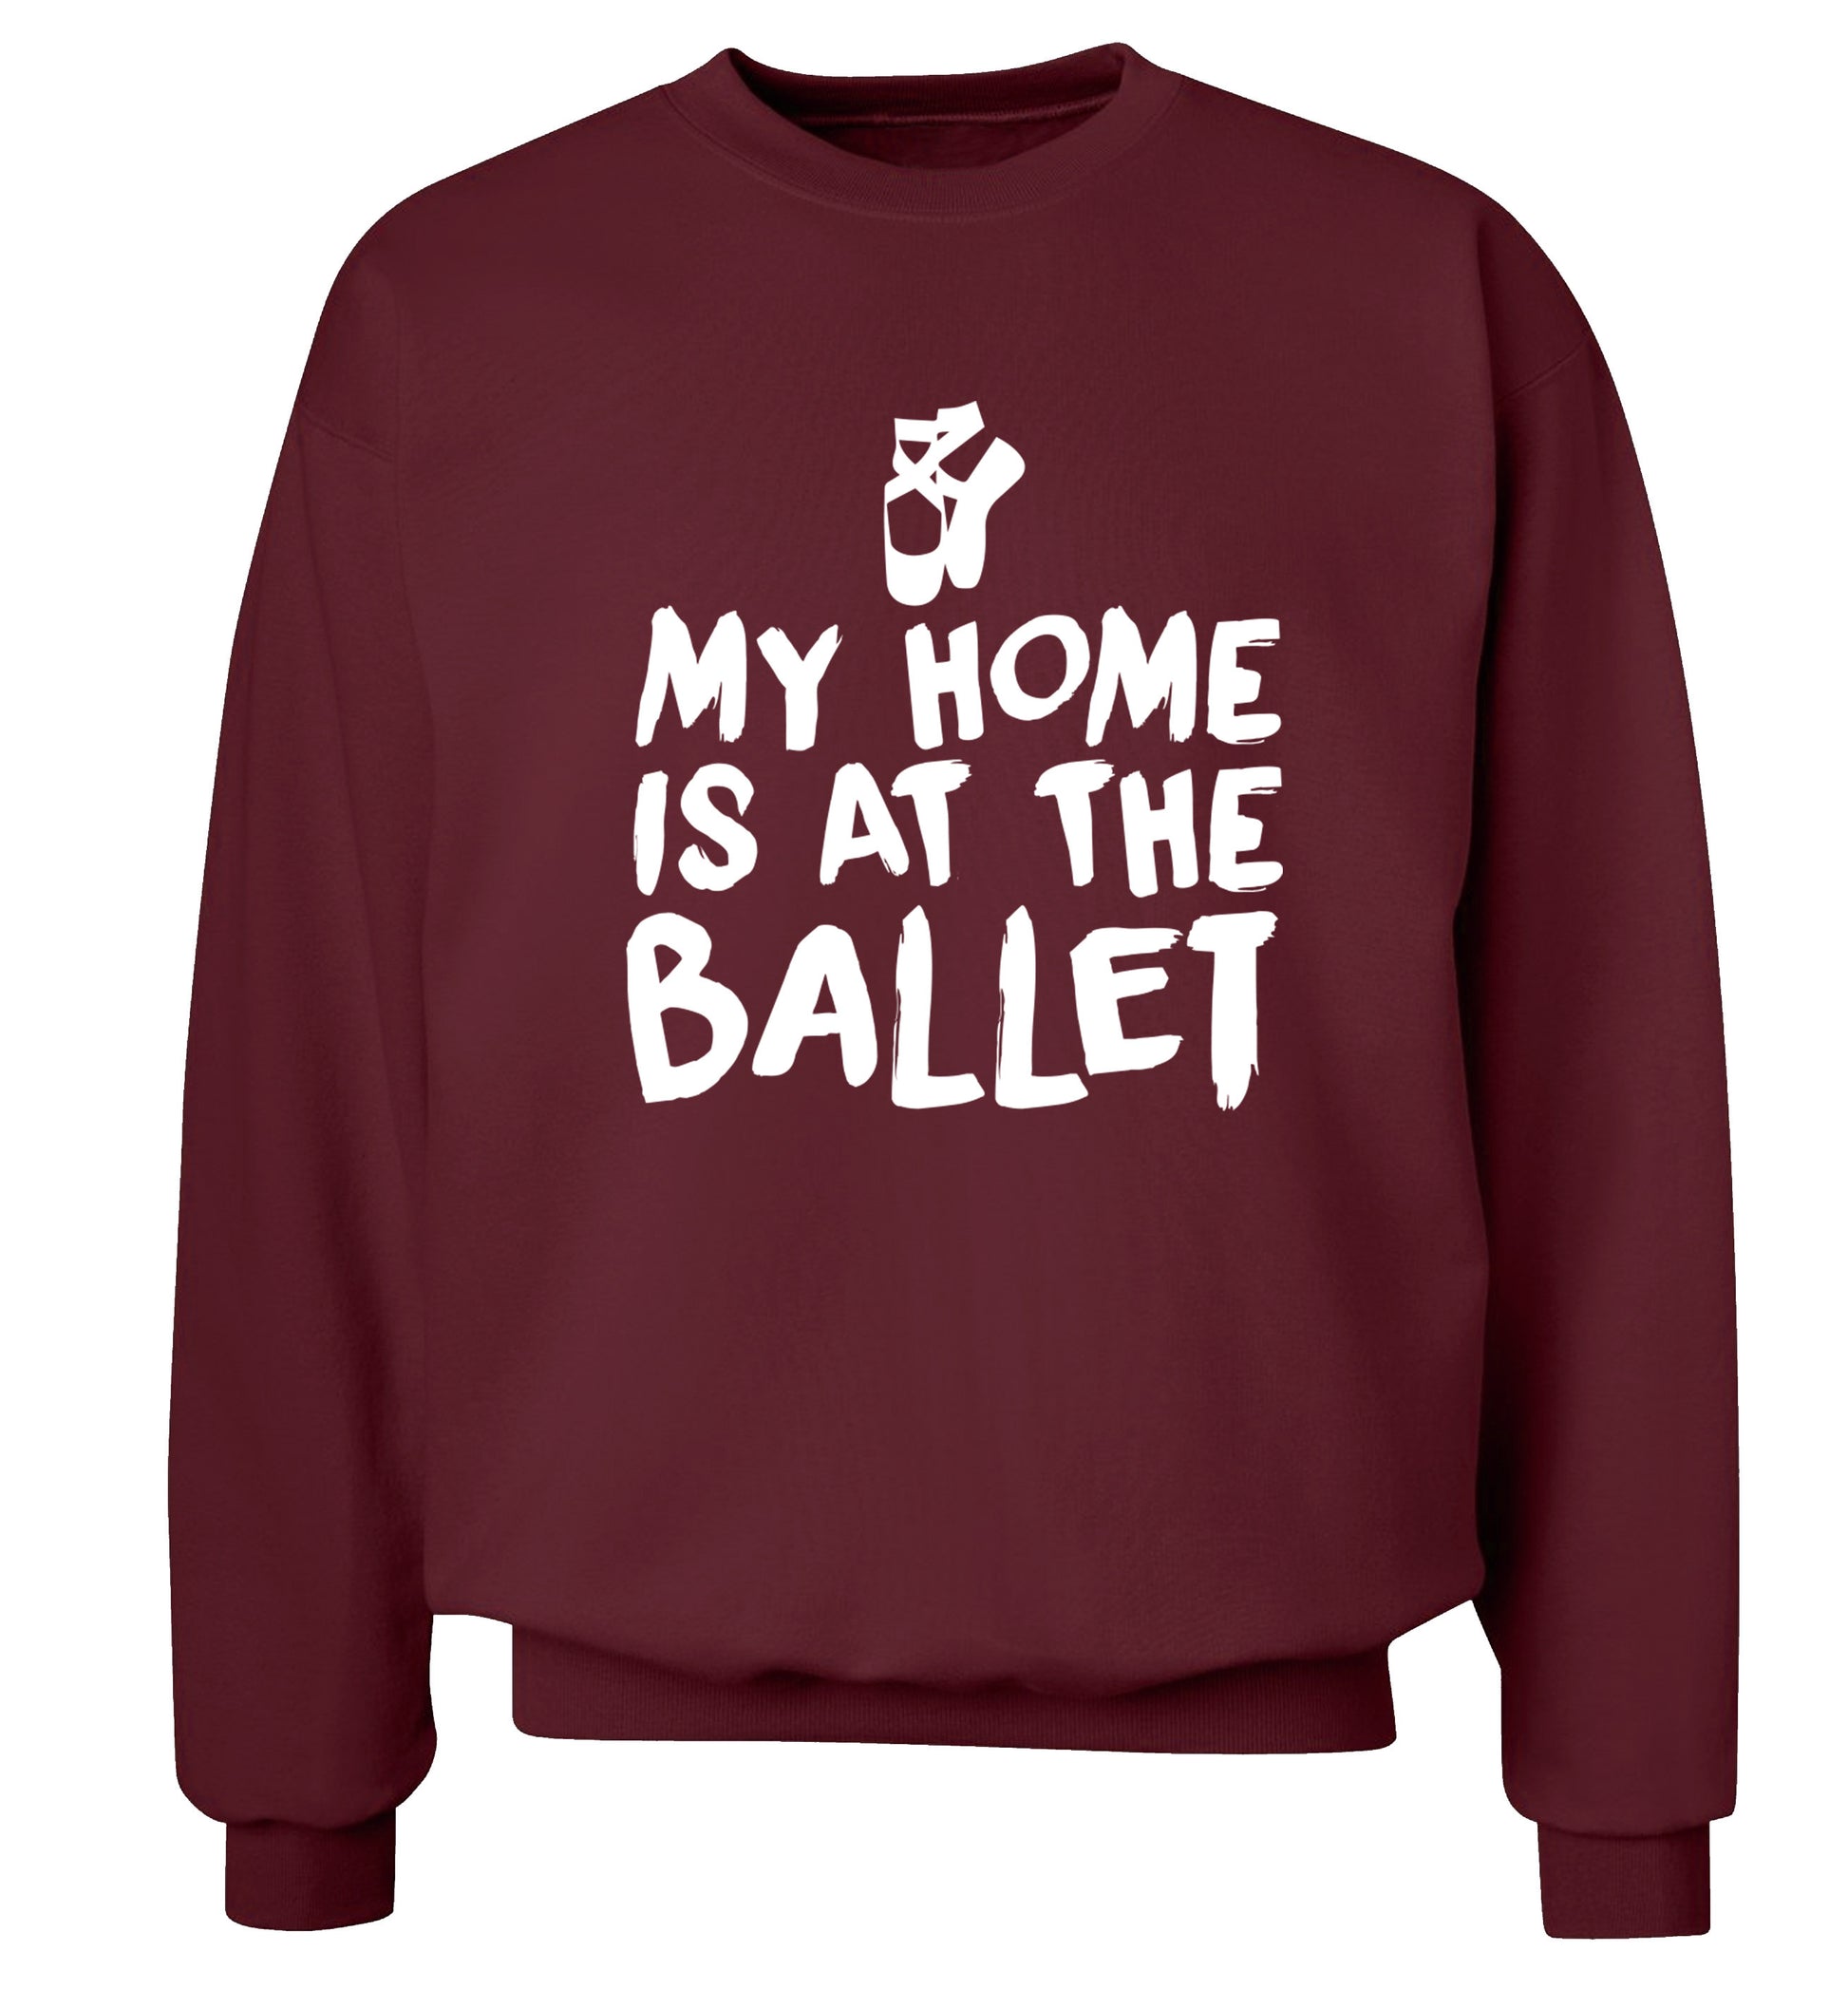 My home is at the ballet Adult's unisex maroon Sweater 2XL